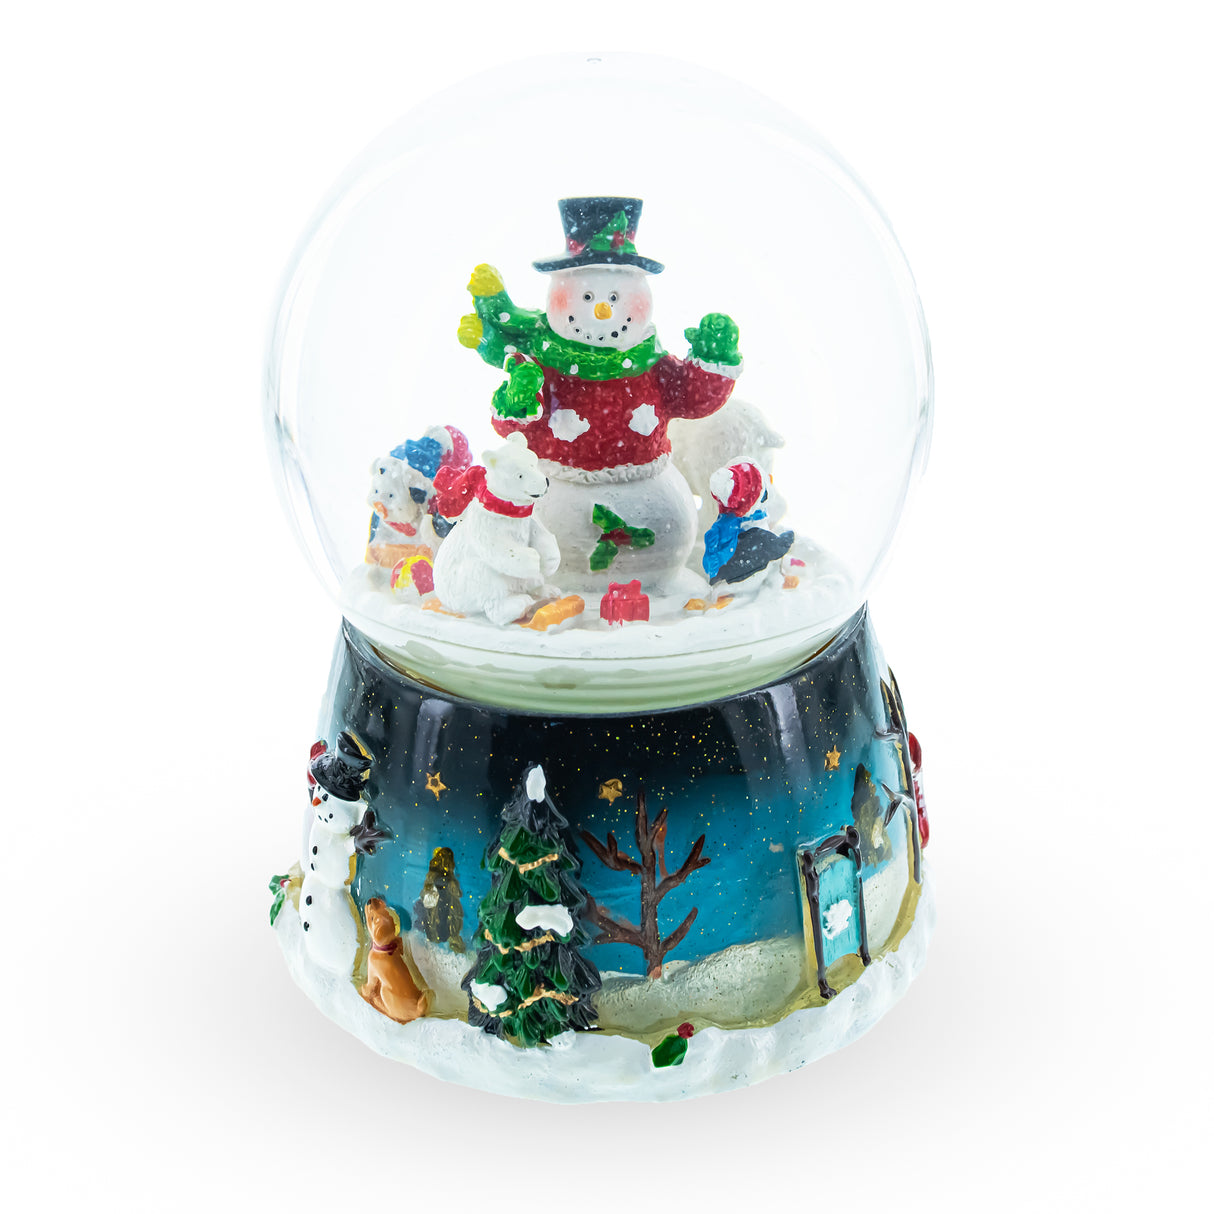 Polar Party: Snowman, Polar Bears, and Penguins Musical Spinning Snow Globe in Multi color, Round shape